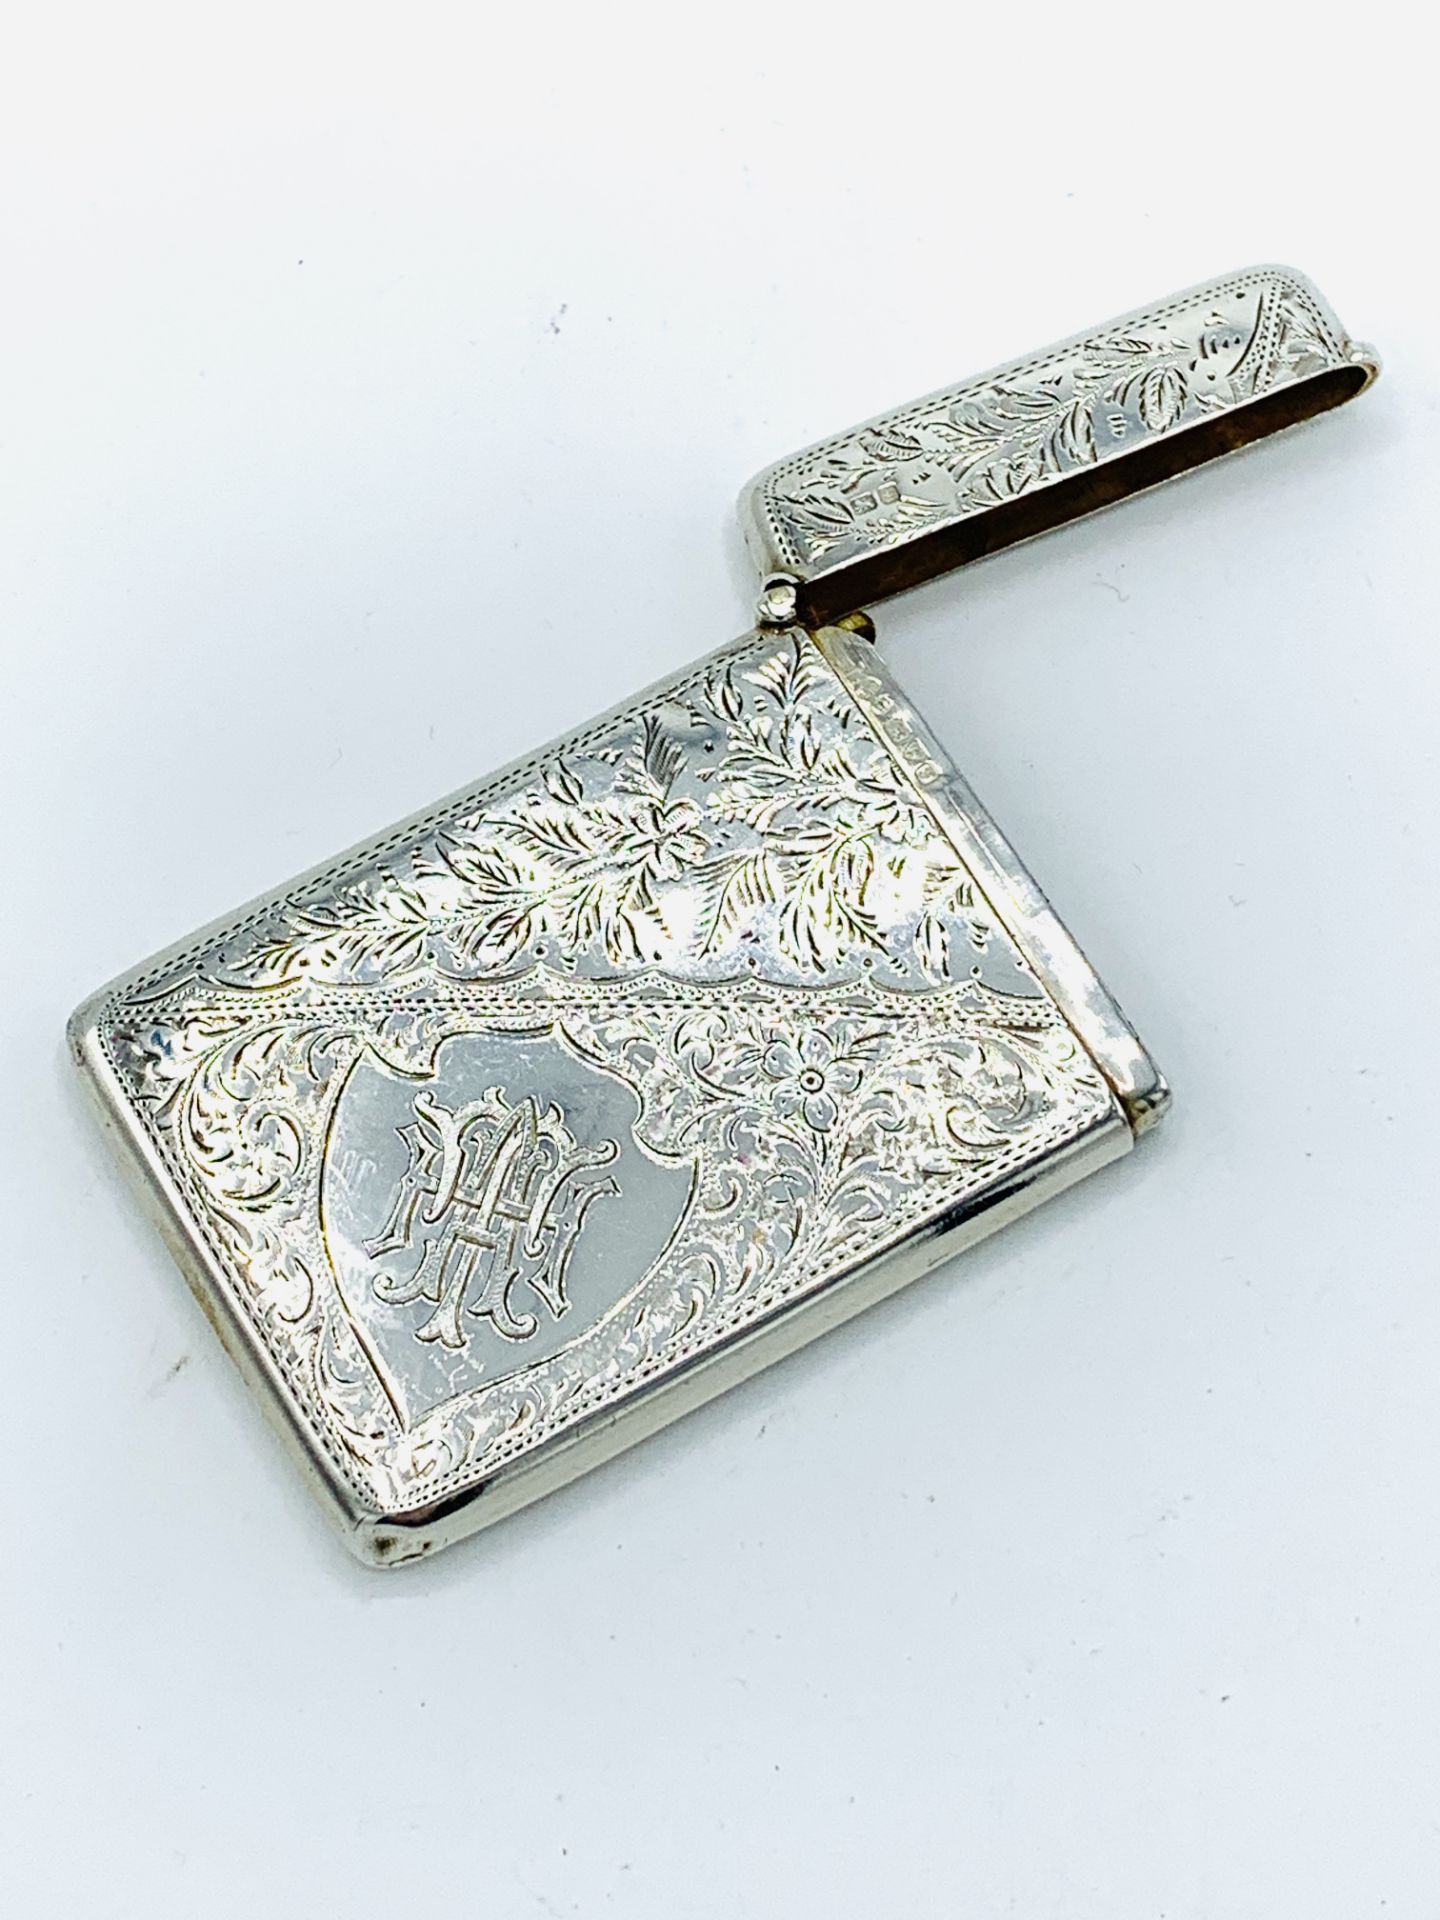 Silver card case, hallmarked Chester 1909 - Image 4 of 4